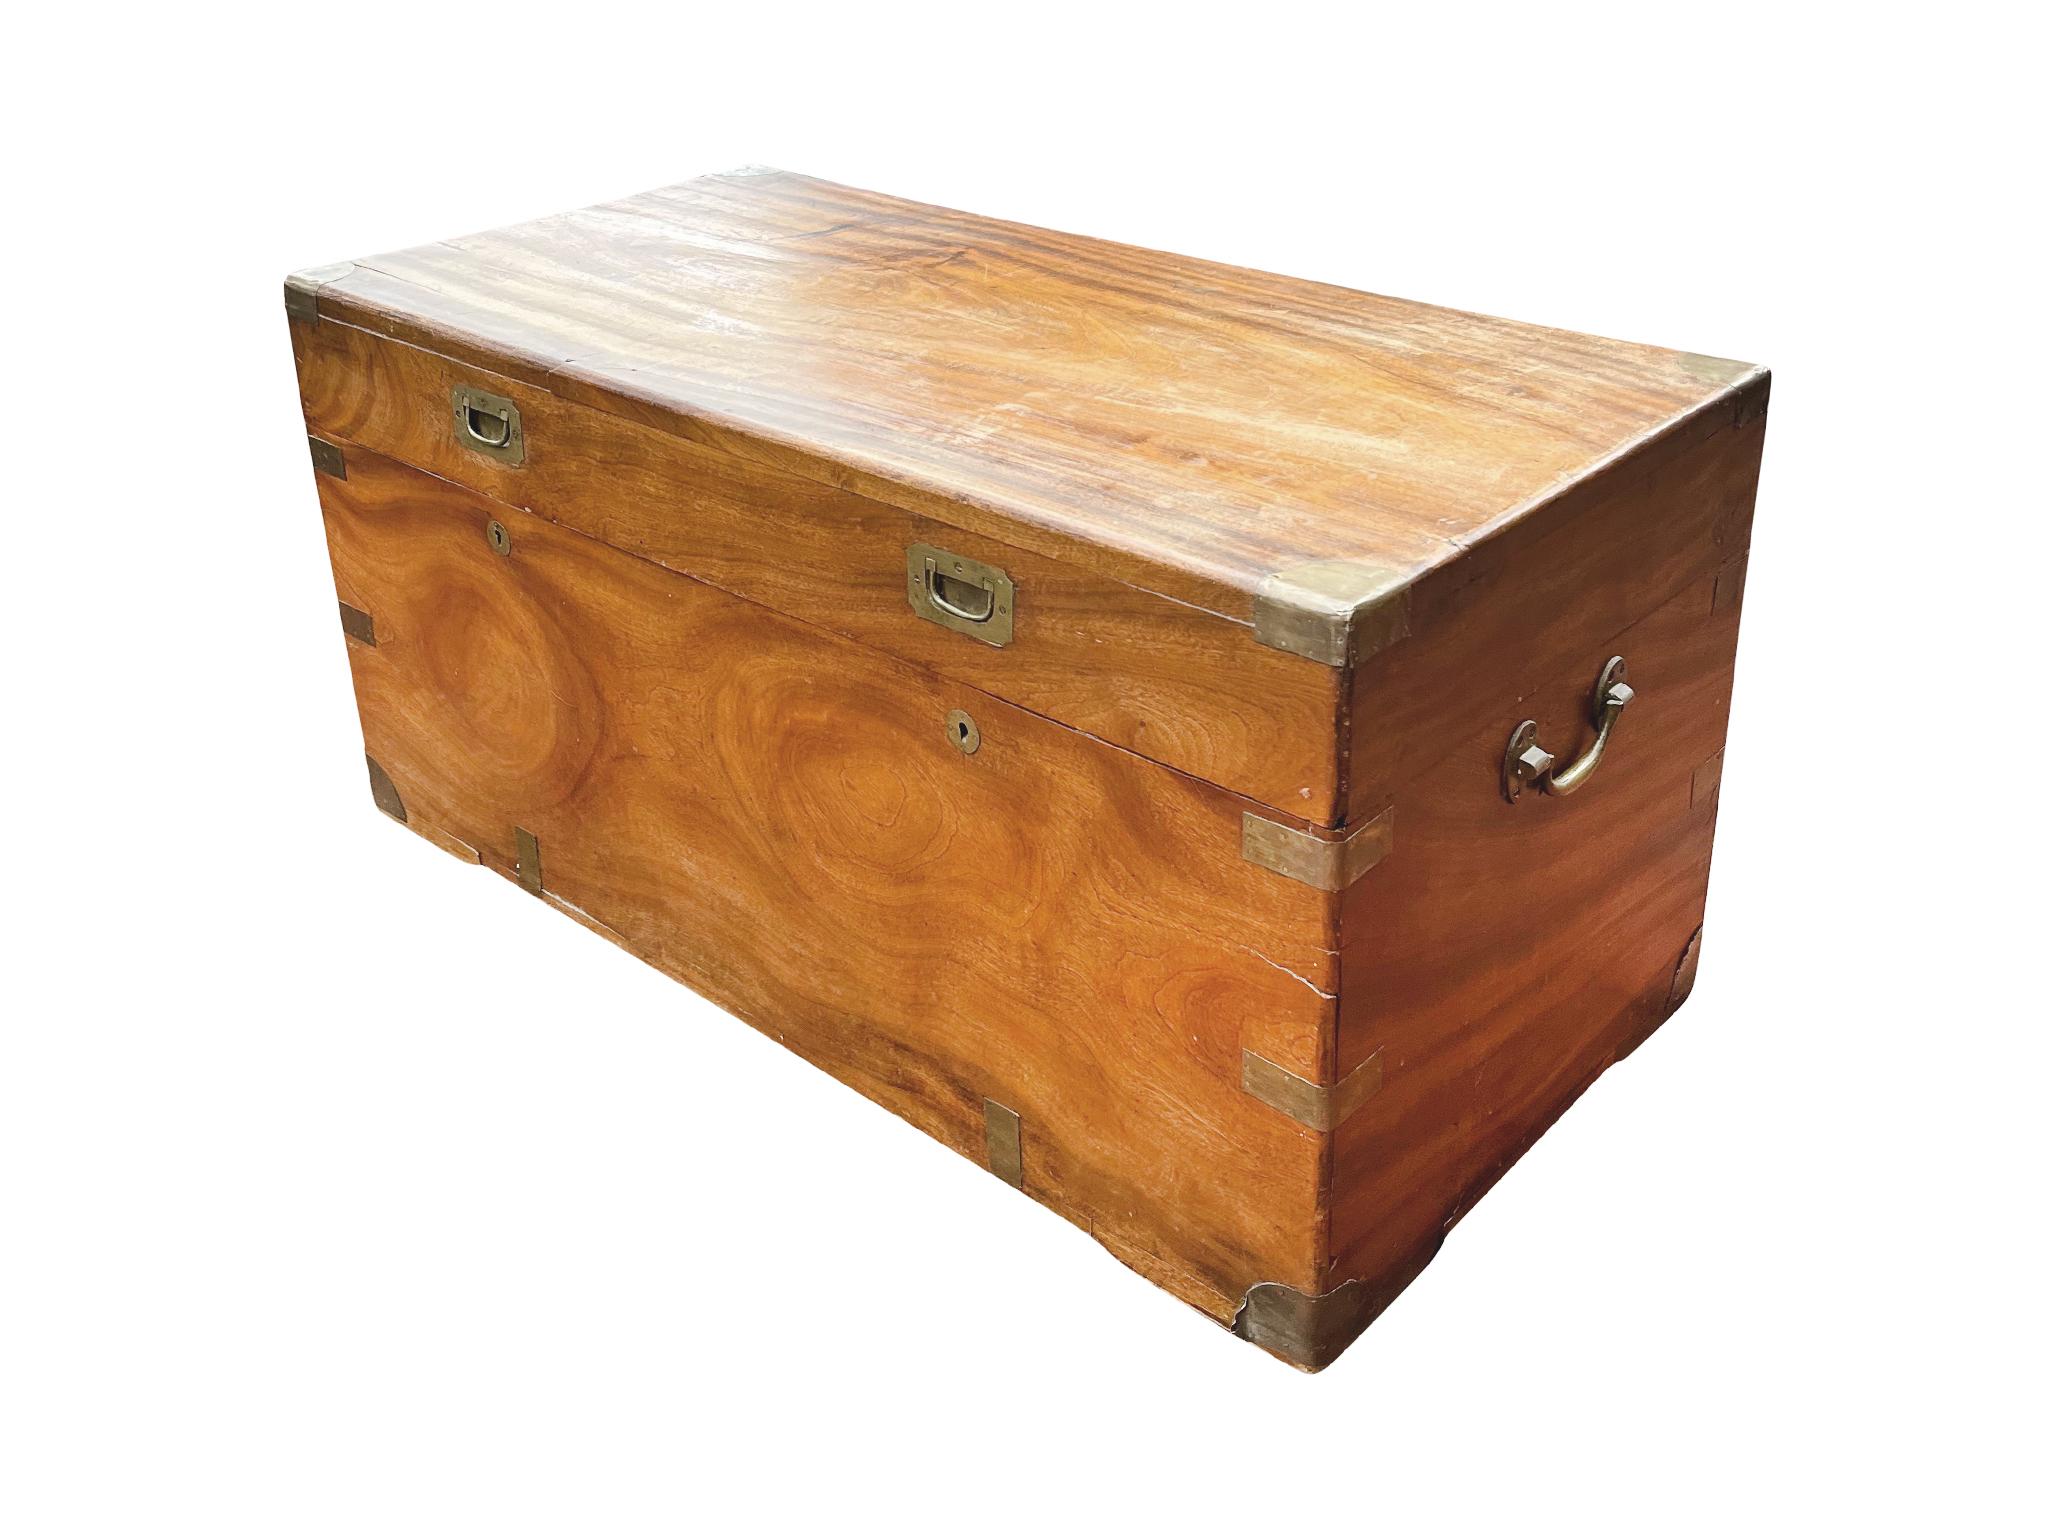 Hand-crafted in England in the 19th Century, the camphorwood chest is brass-bound on the corners and edges, with bail handles mounted to the sides and with two brass inset pulls and locks. Accrued marks over the years give the chest warmth,